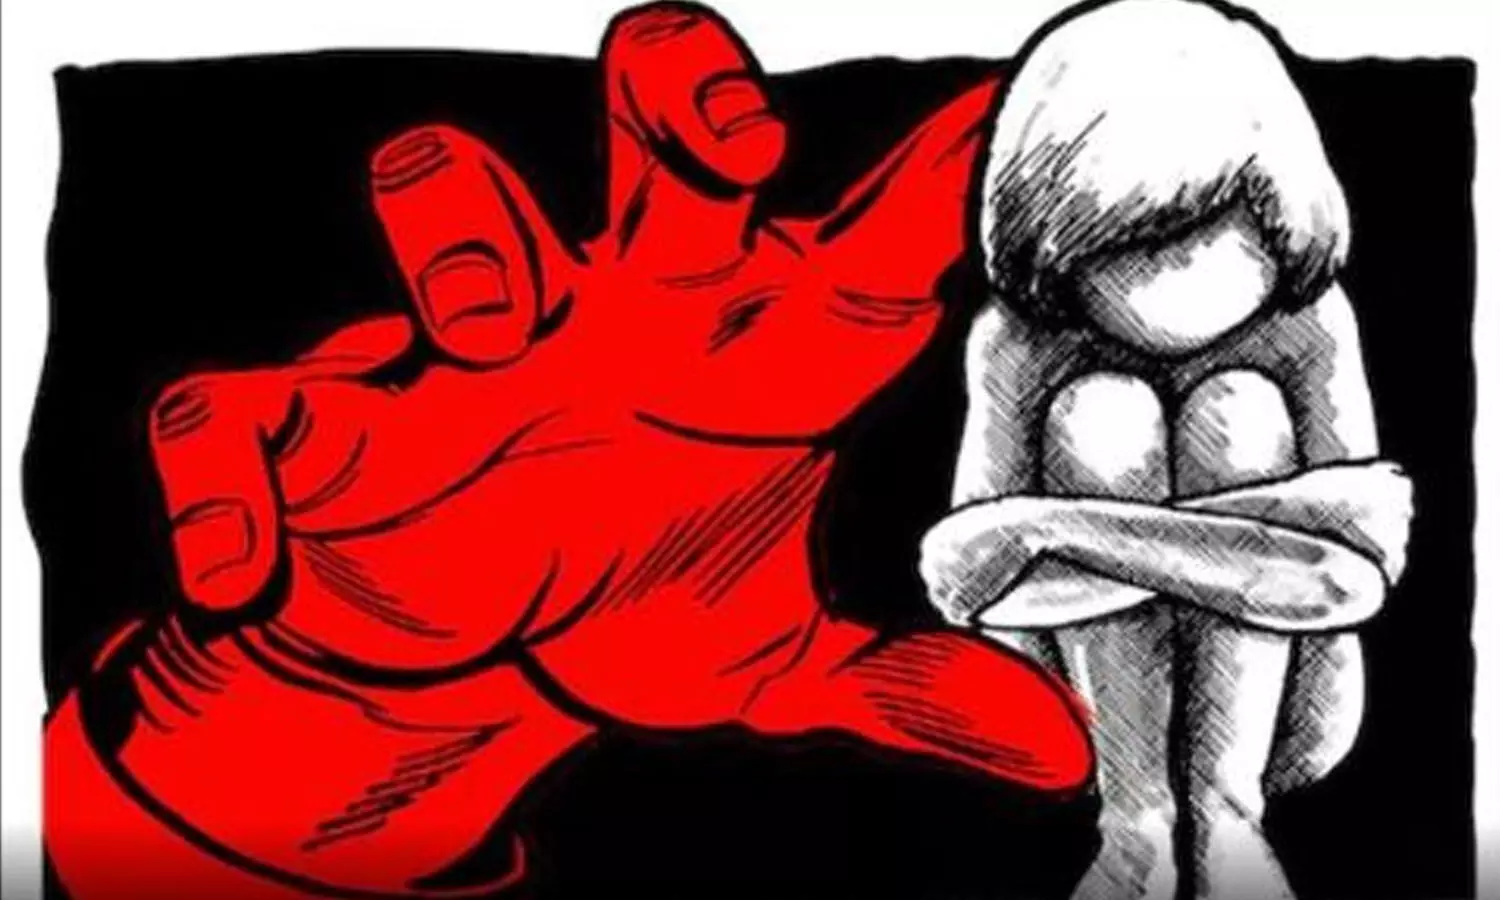 16-year-old girl gang-raped in Meerpet, four detained, locals express anguish